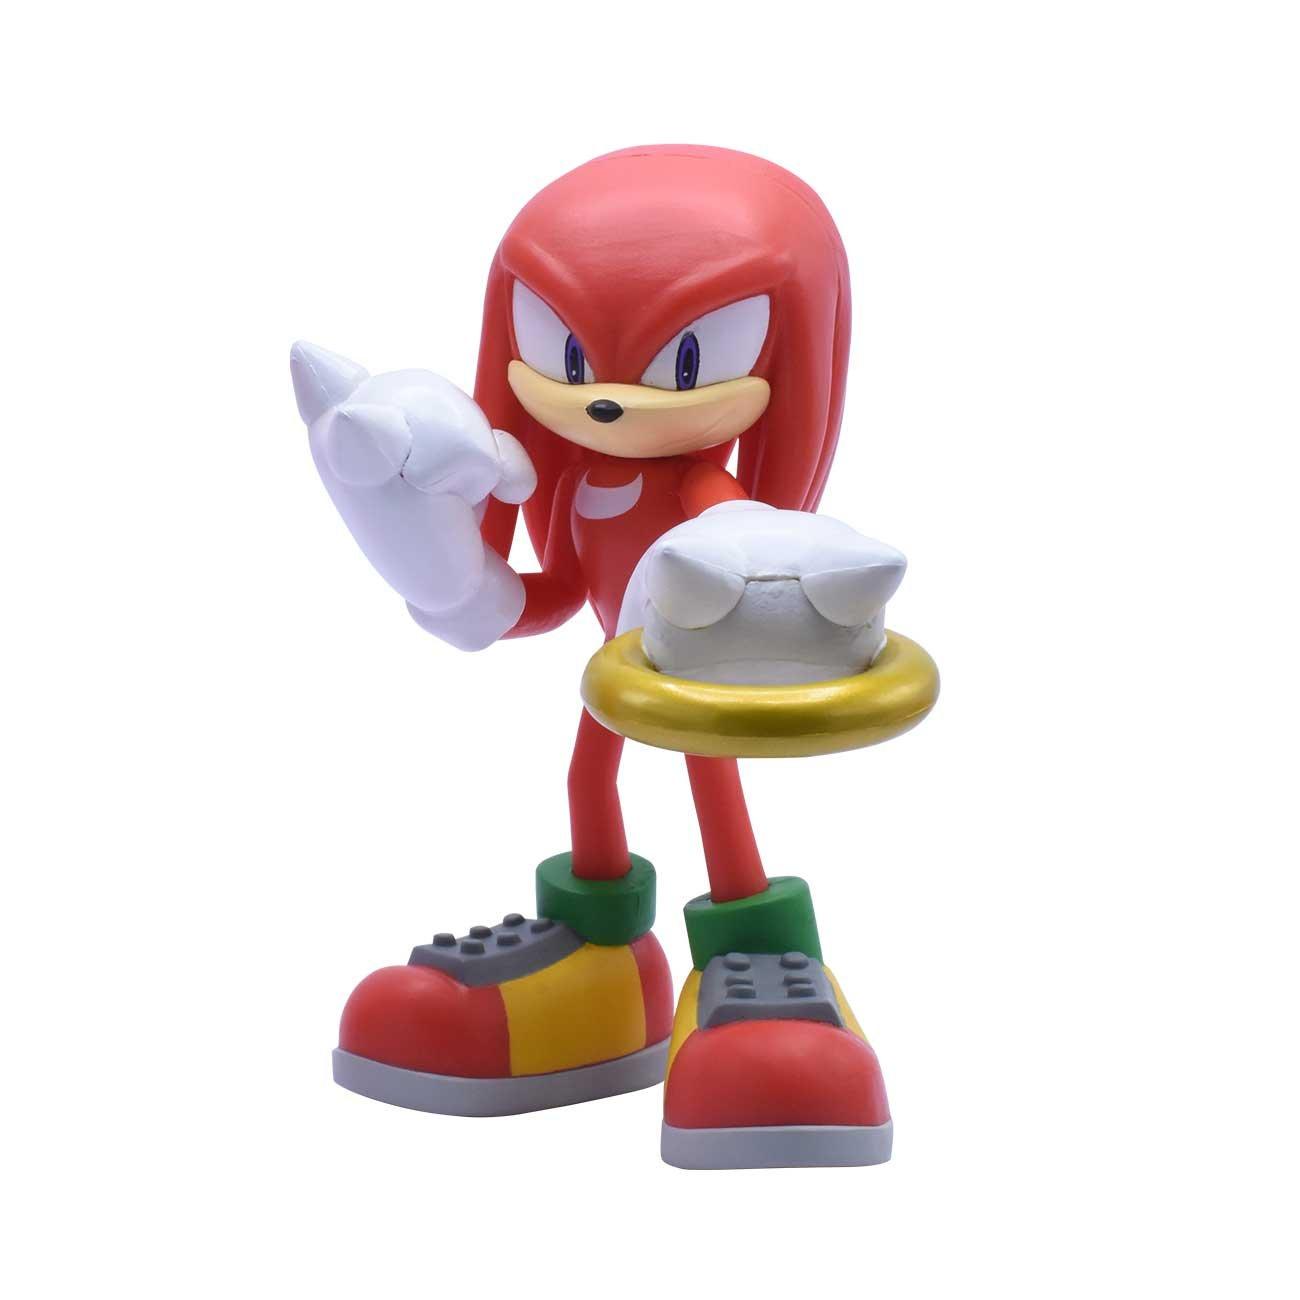 New Free Gifts Update + How To Get Knuckles And Riders Sonic!